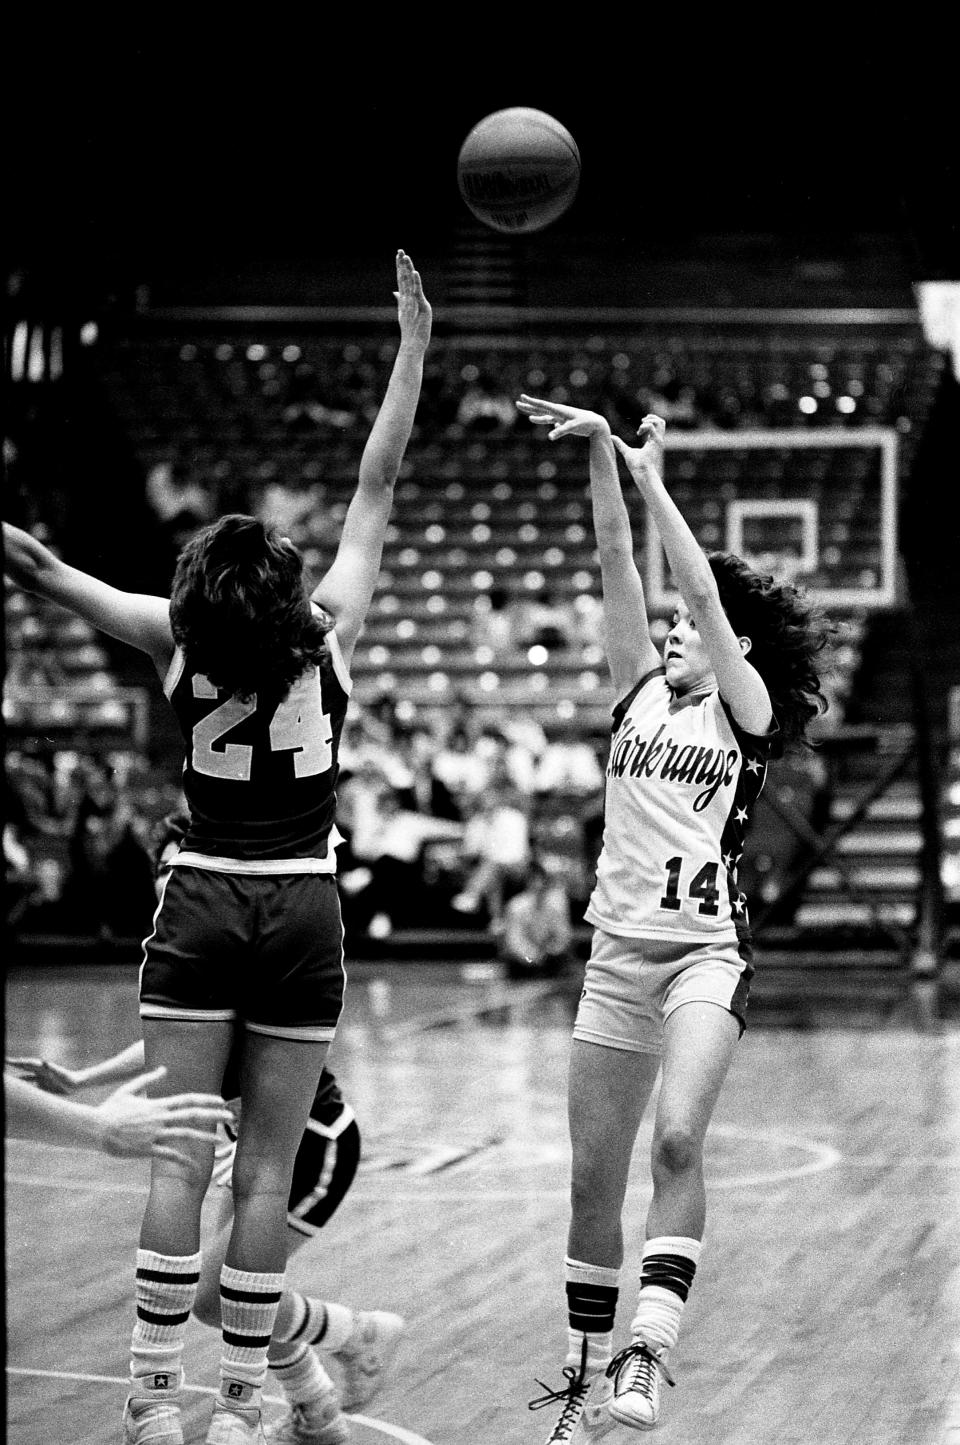 Clarkrange High sophomore guard Shawn Monday (14) gets her shot off against Rickman High sophomore Tonia Woolbright (24) during the TSSAA Class A state championship game at MTSU’s Murphy Center on March 17, 1984. Clarkrange won their second straight title with a 40-38 victory.